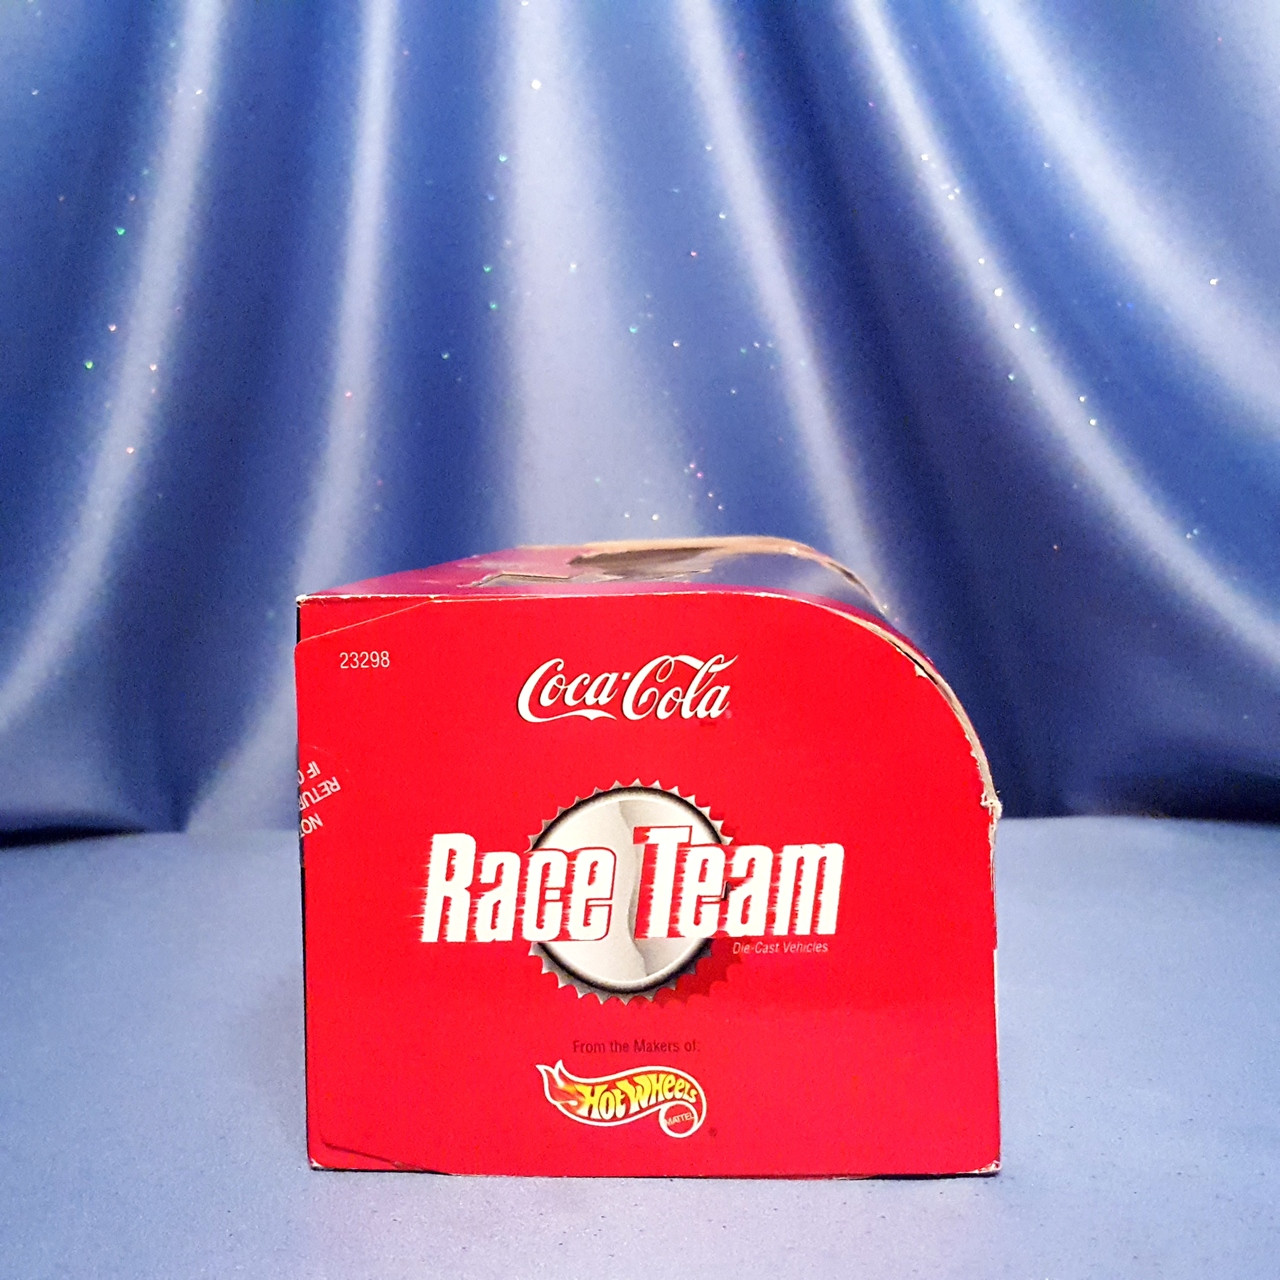 Coca-Cola Race Team 4 Piece Car Collection by Hot Wheels. - Now